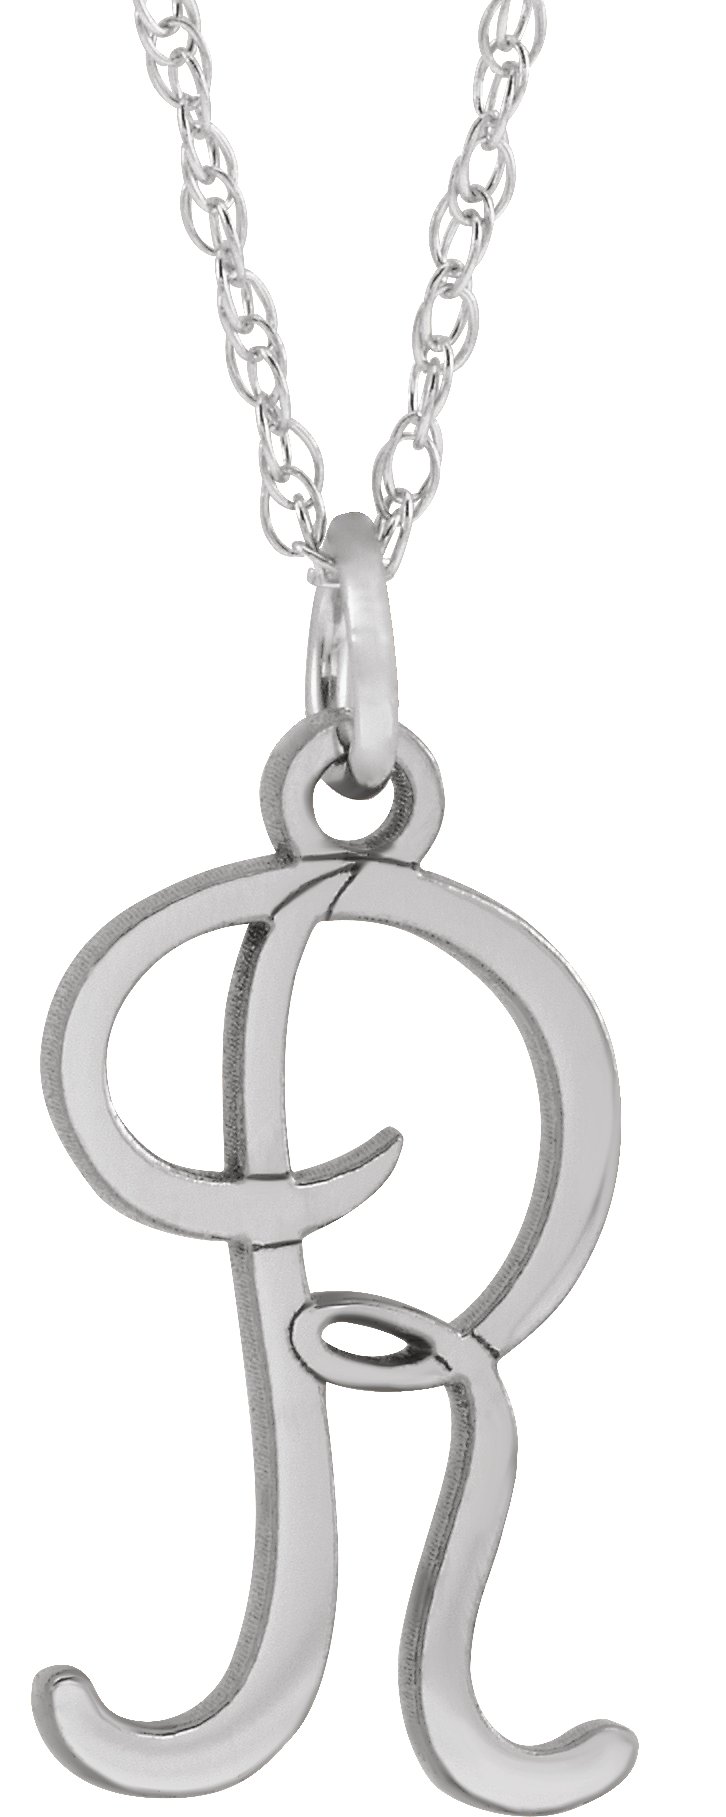 Sterling Silver Script Initial R 16-18" Necklace